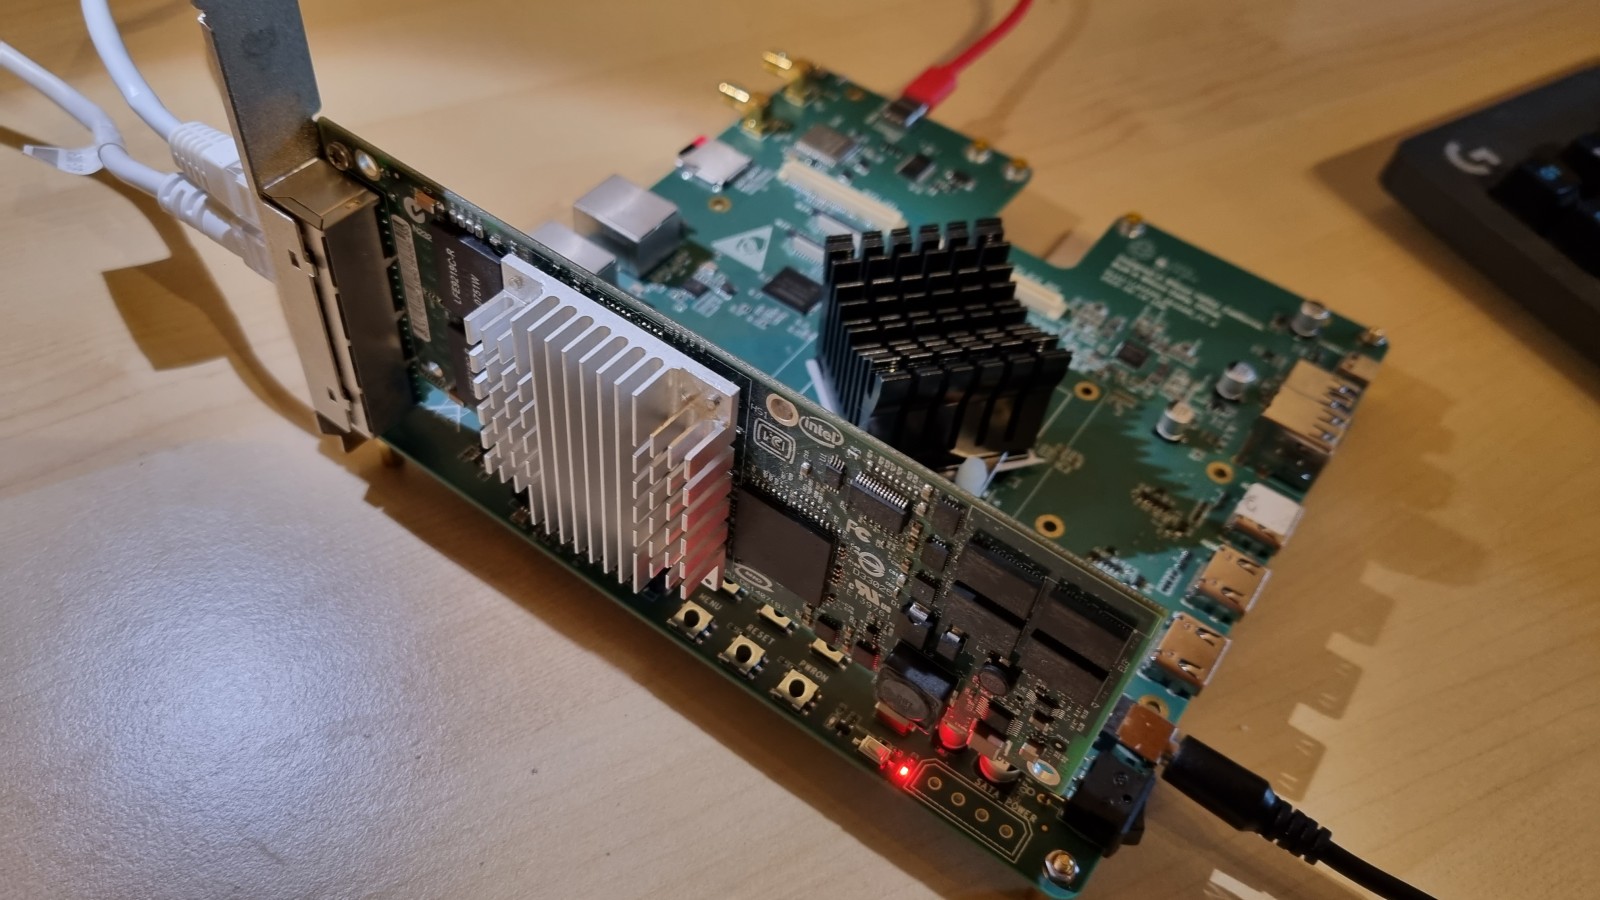 The Intel 4xGbe NIC plugged in the PCIe socket